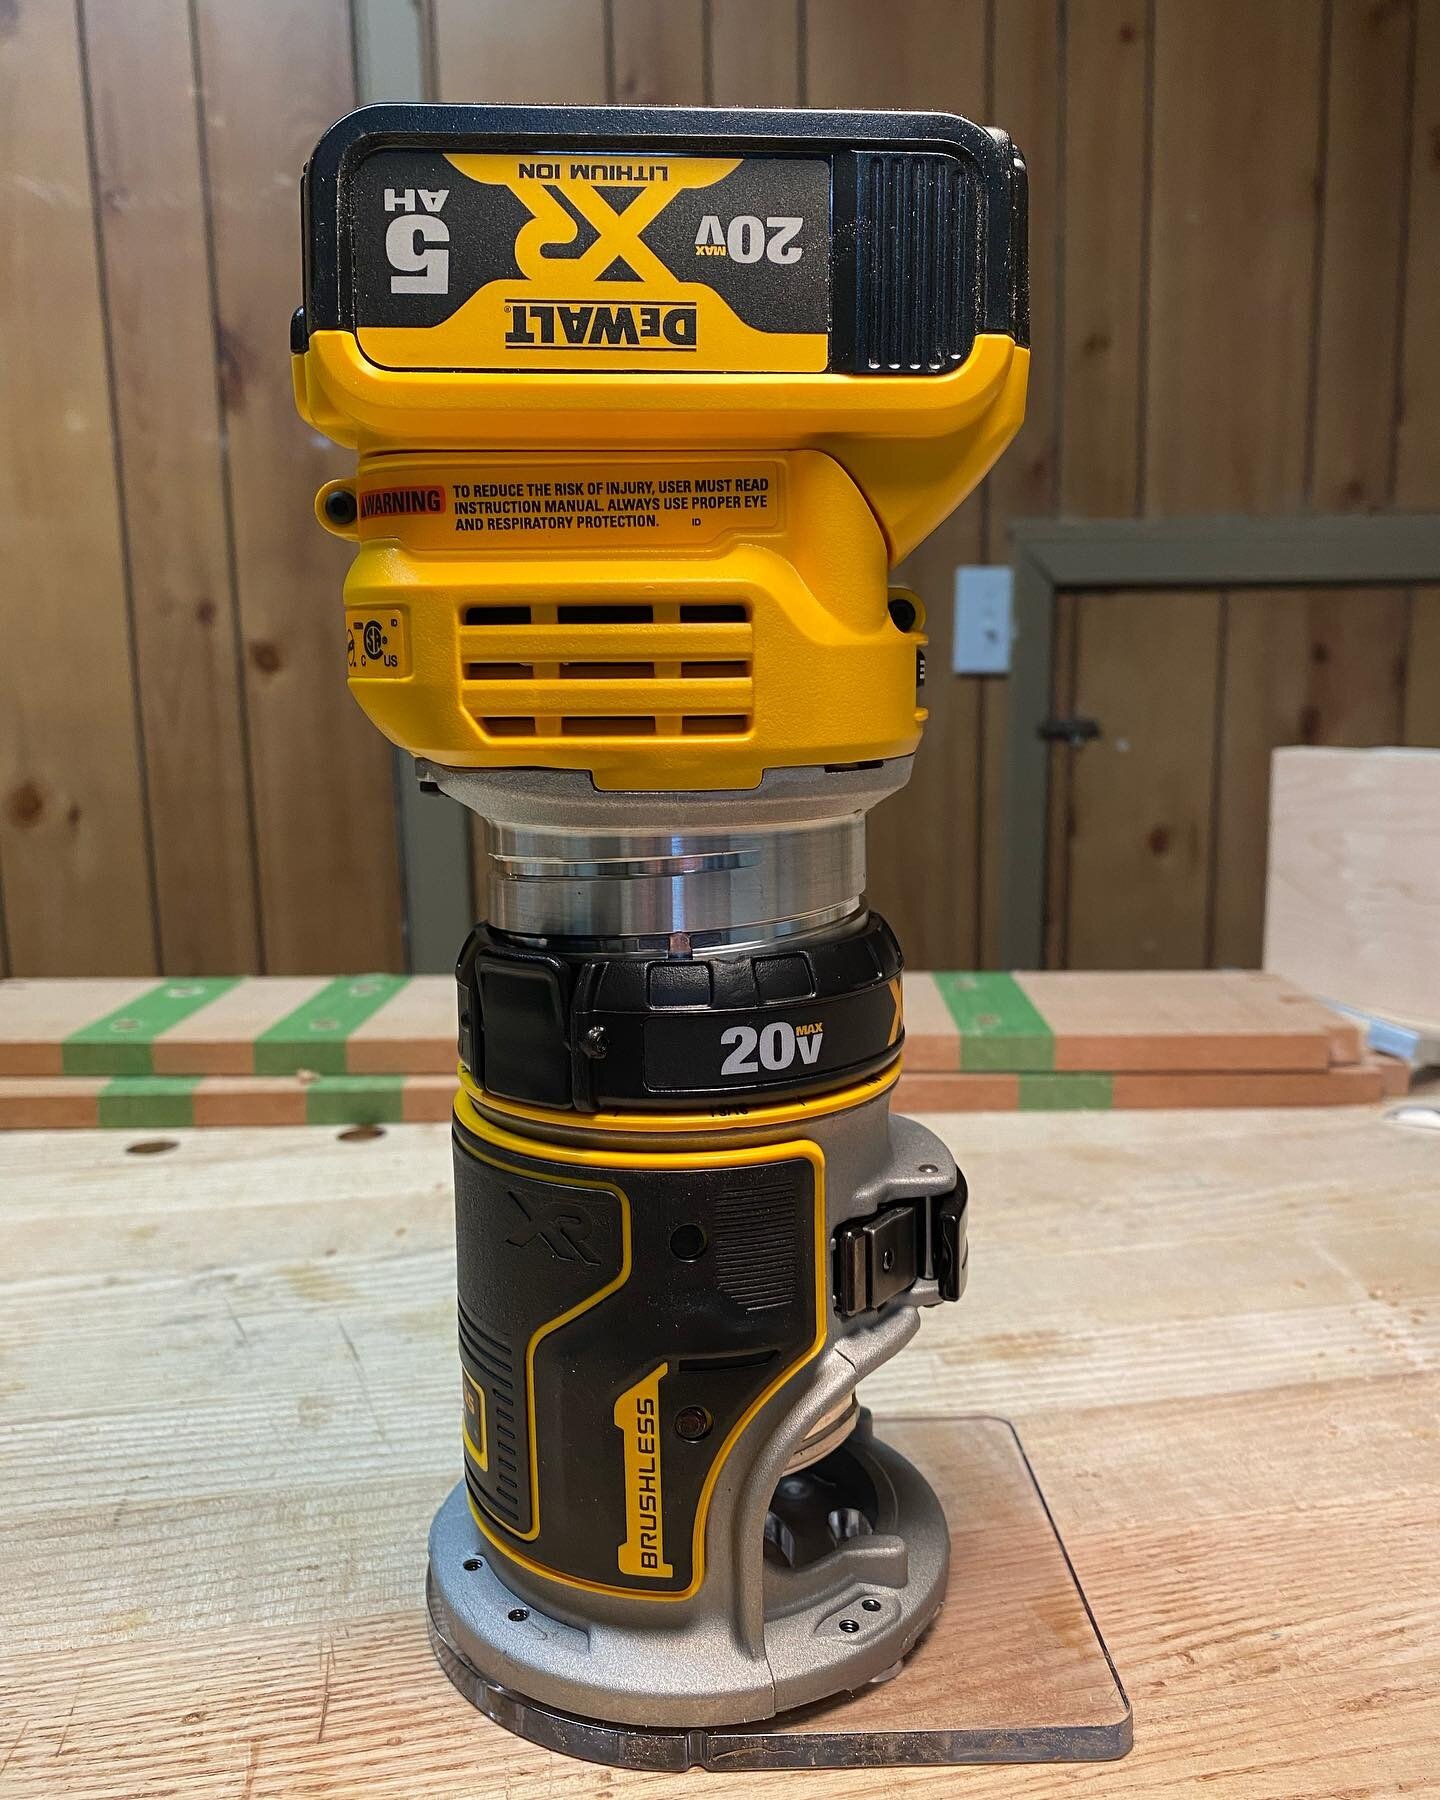 Another router in the shop.  Small palm router to help out on the smaller tasks.  Will help with cleaning between tails to flatten the bottom

Nouvelle toupie dans l&rsquo;atelier
@dewalt_ca 

#lesateliersbonzai #router  #dewalt #woodworking #powerto